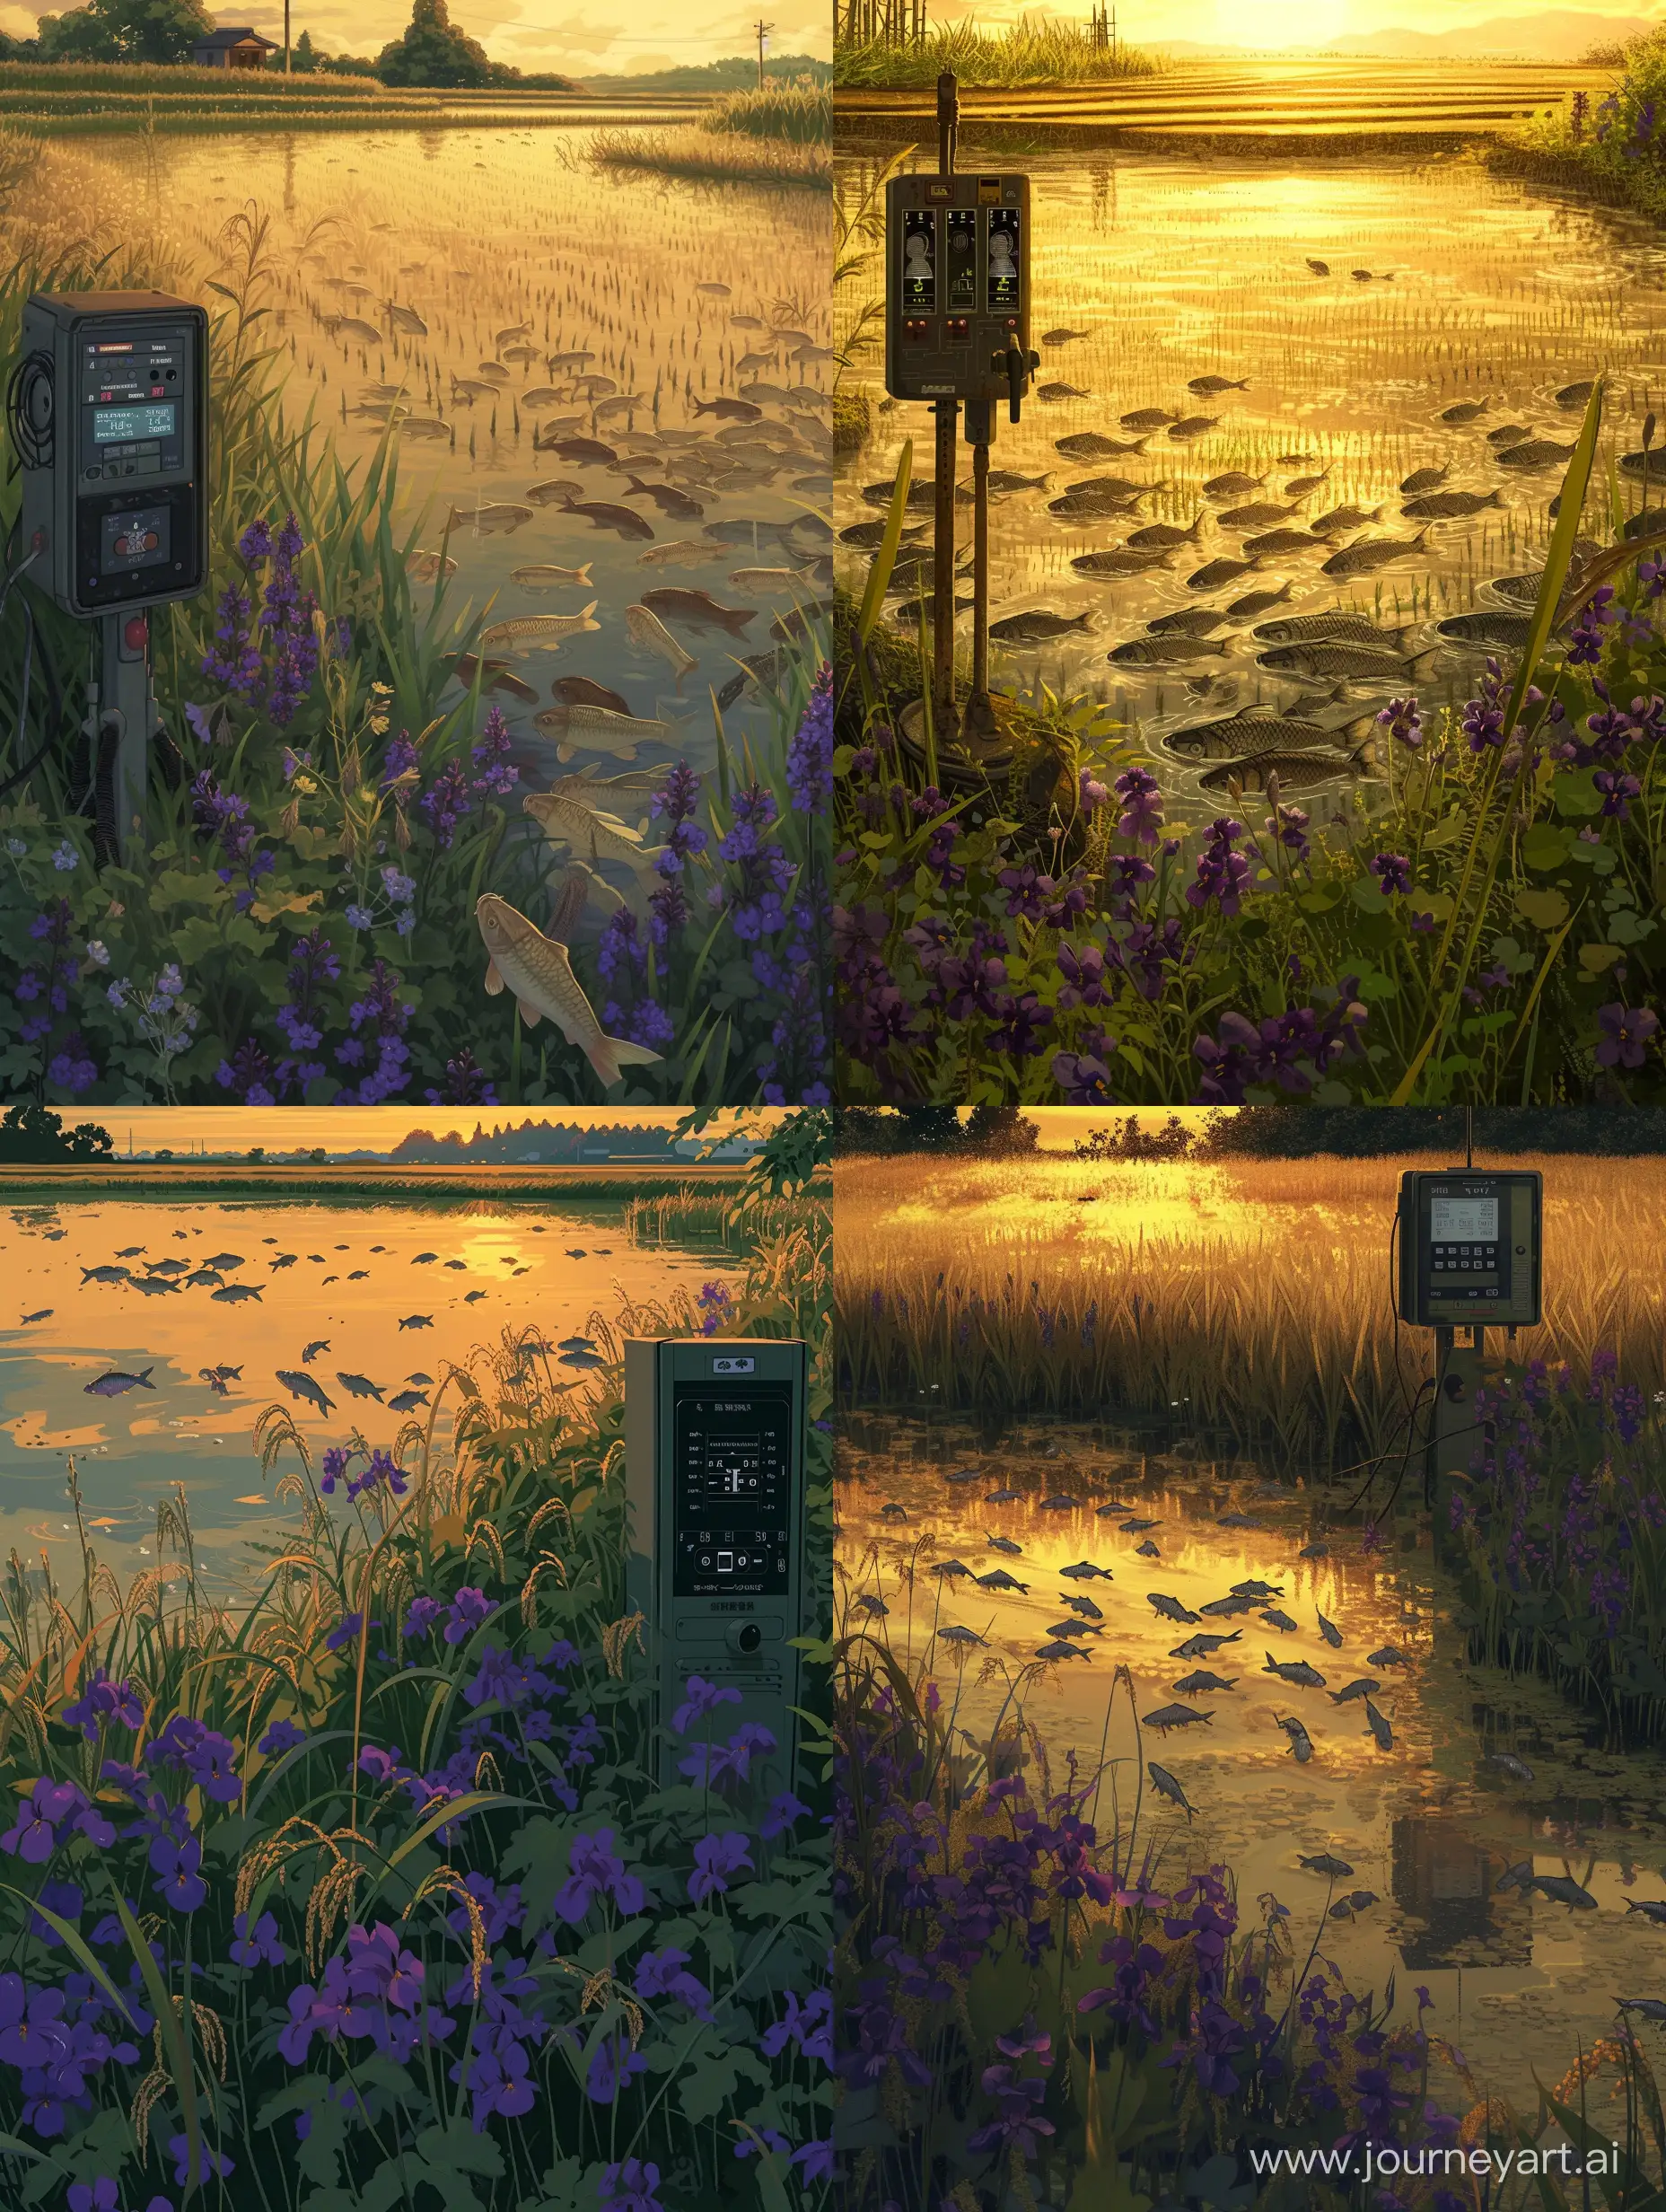 Golden-Rice-Fields-Weather-Station-Tranquil-Scene-with-Carp-and-Flowers